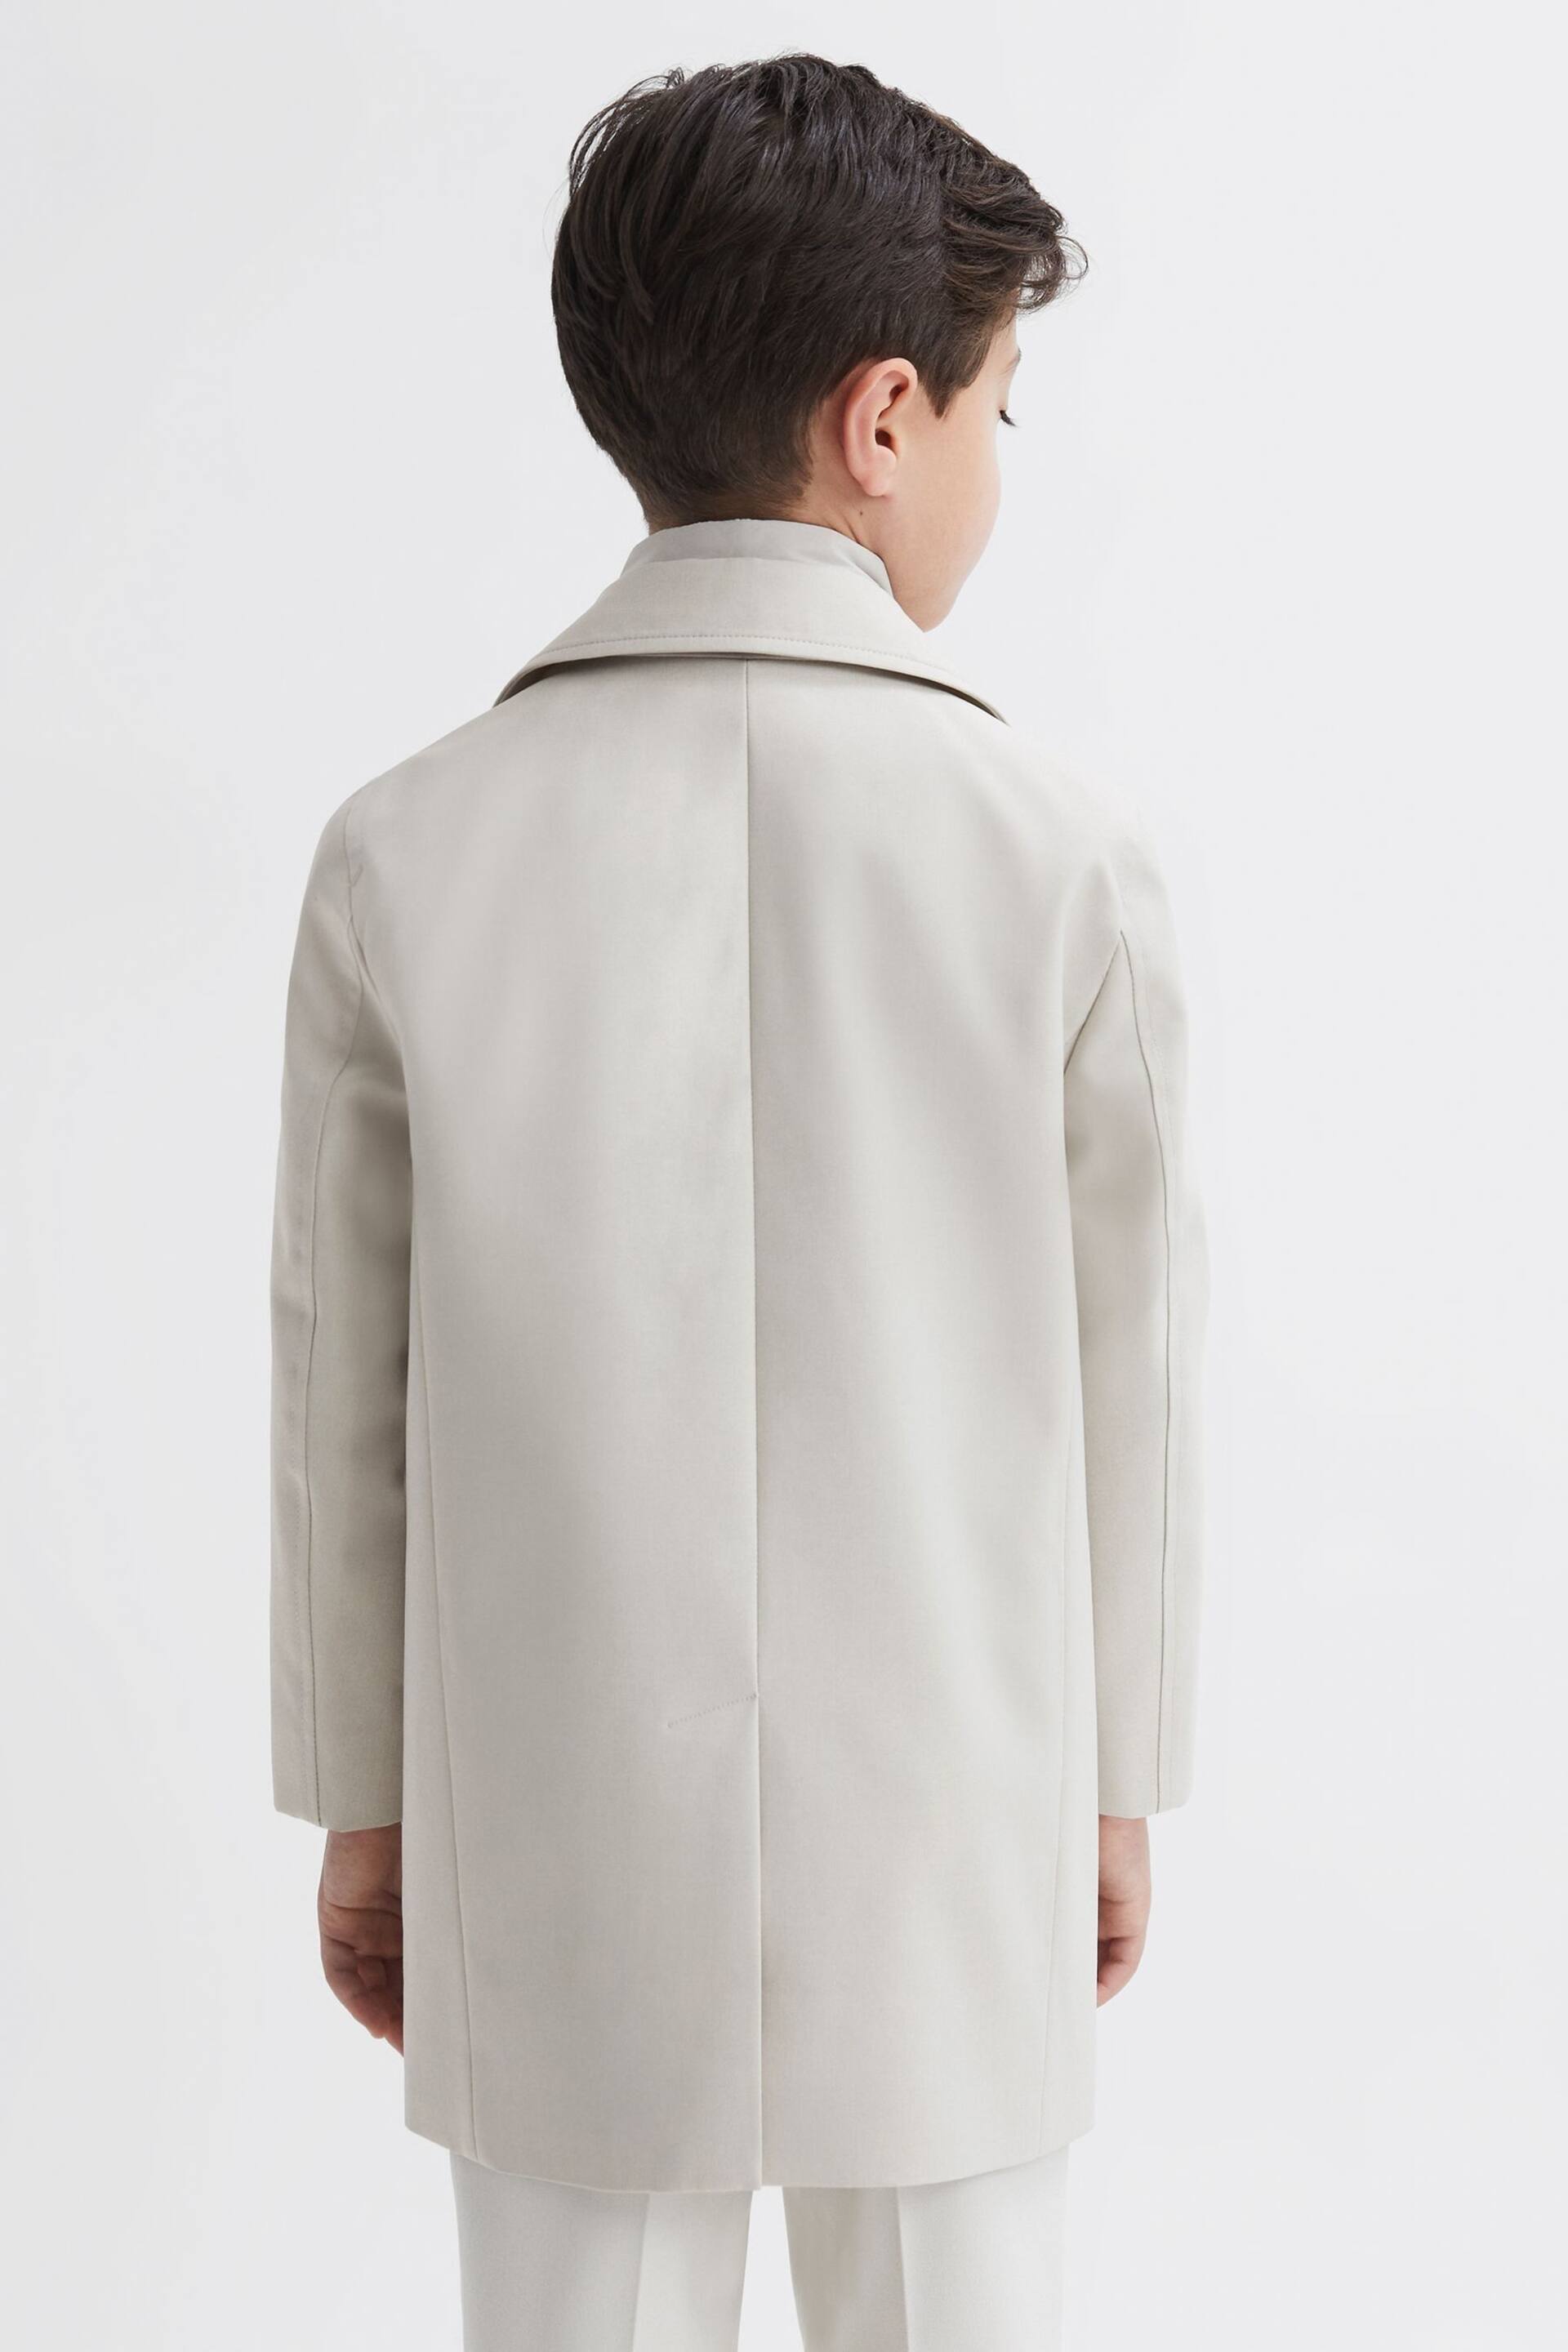 Reiss Stone Perrin Senior Trench With Funnel-Neck Insert - Image 6 of 7